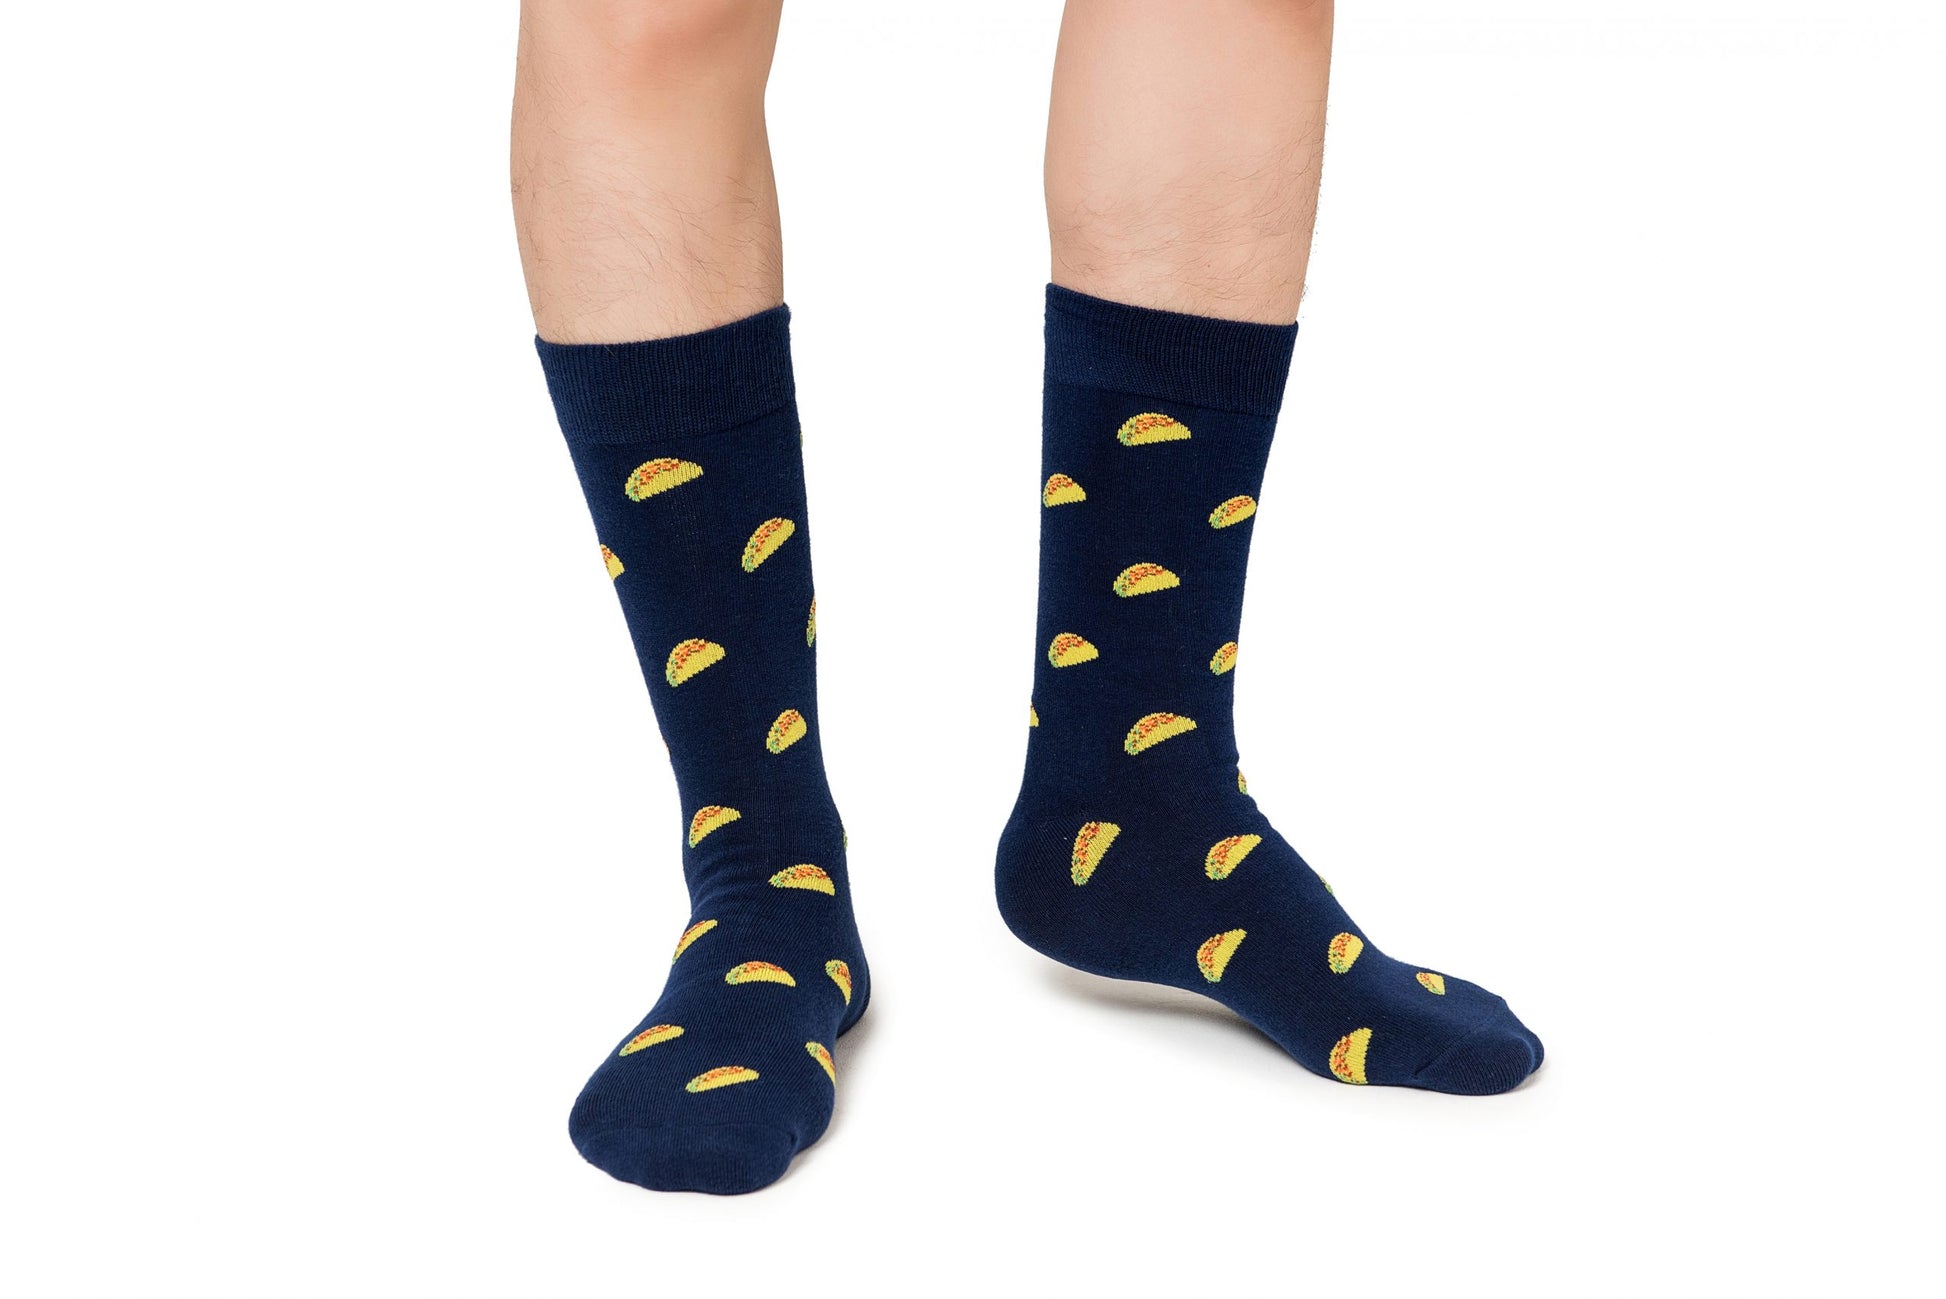 A pair of legs wearing flavor-packed Taco Socks with a playful yellow taco pattern on a white background.